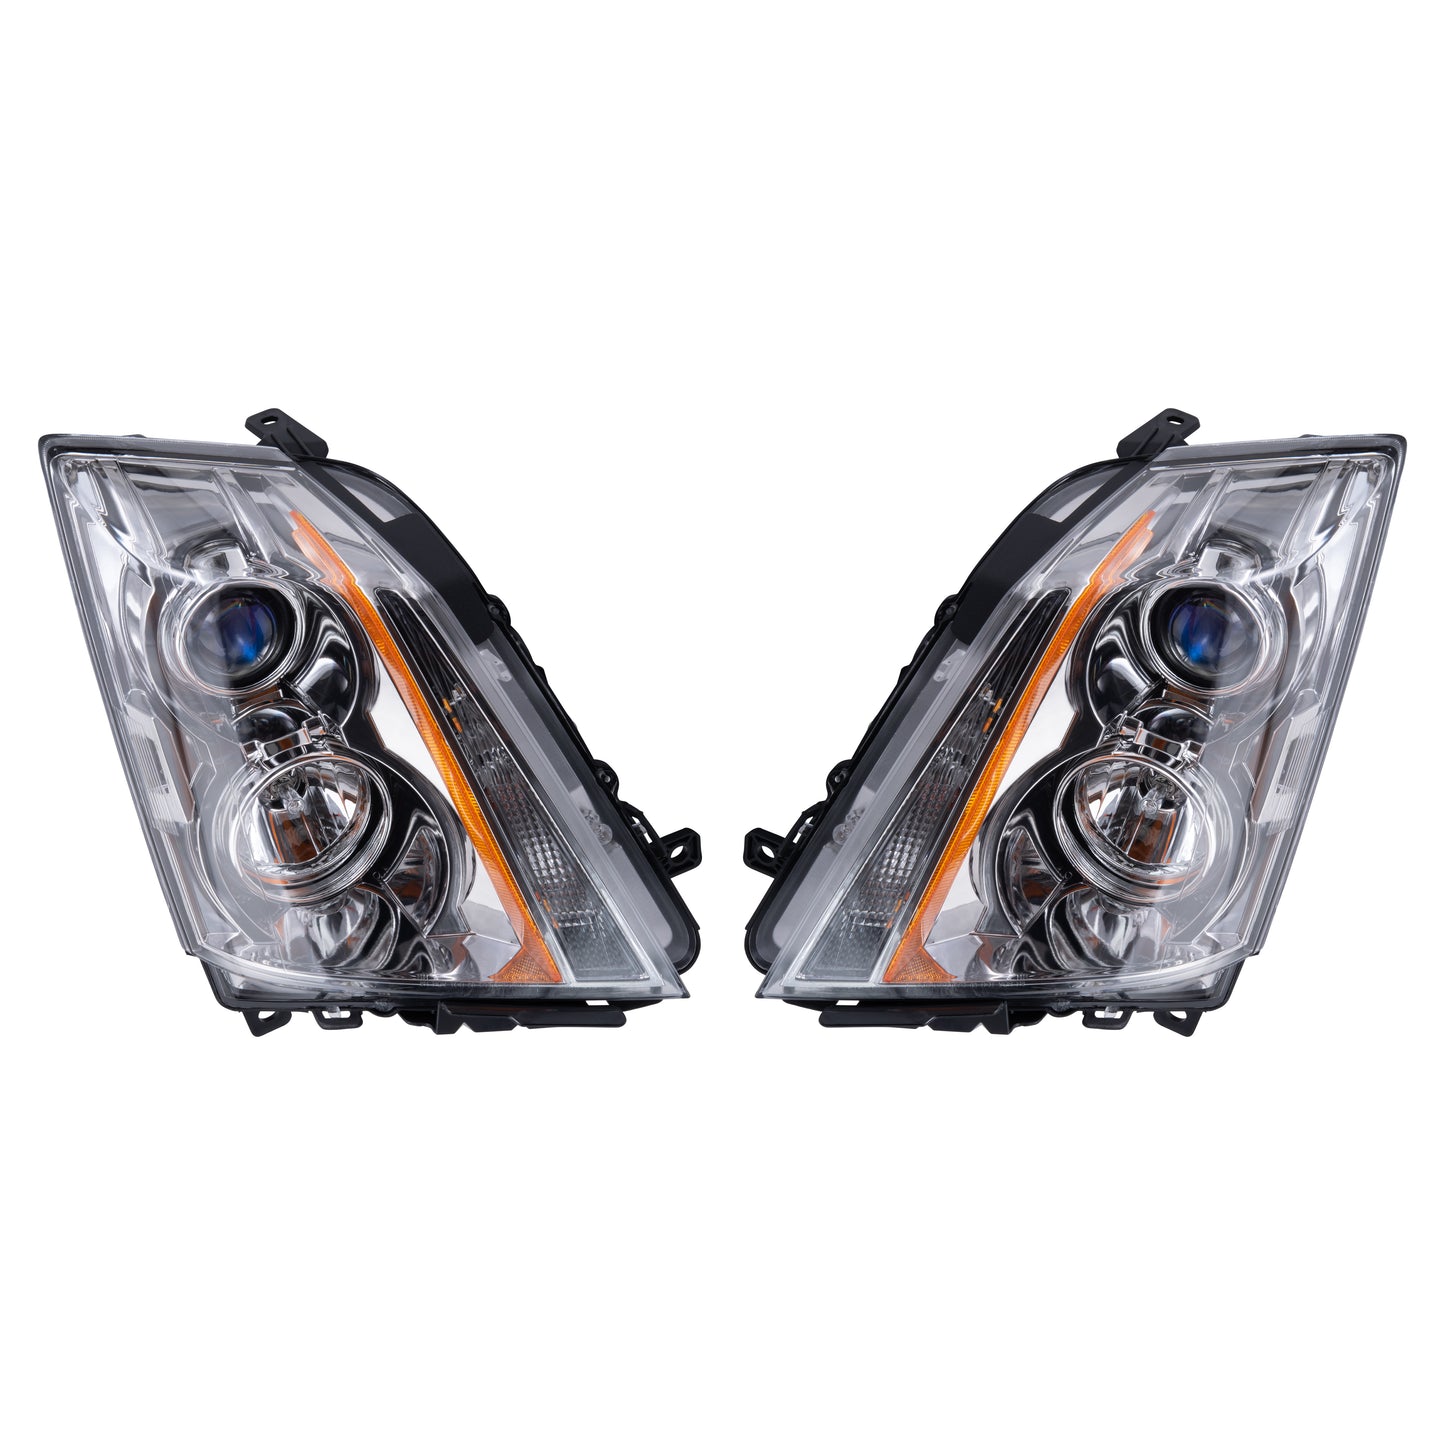 Brock Replacement Driver and Passenger Set Halogen Headlights Compatible with 2008-2014 CTS 22783445 25897358